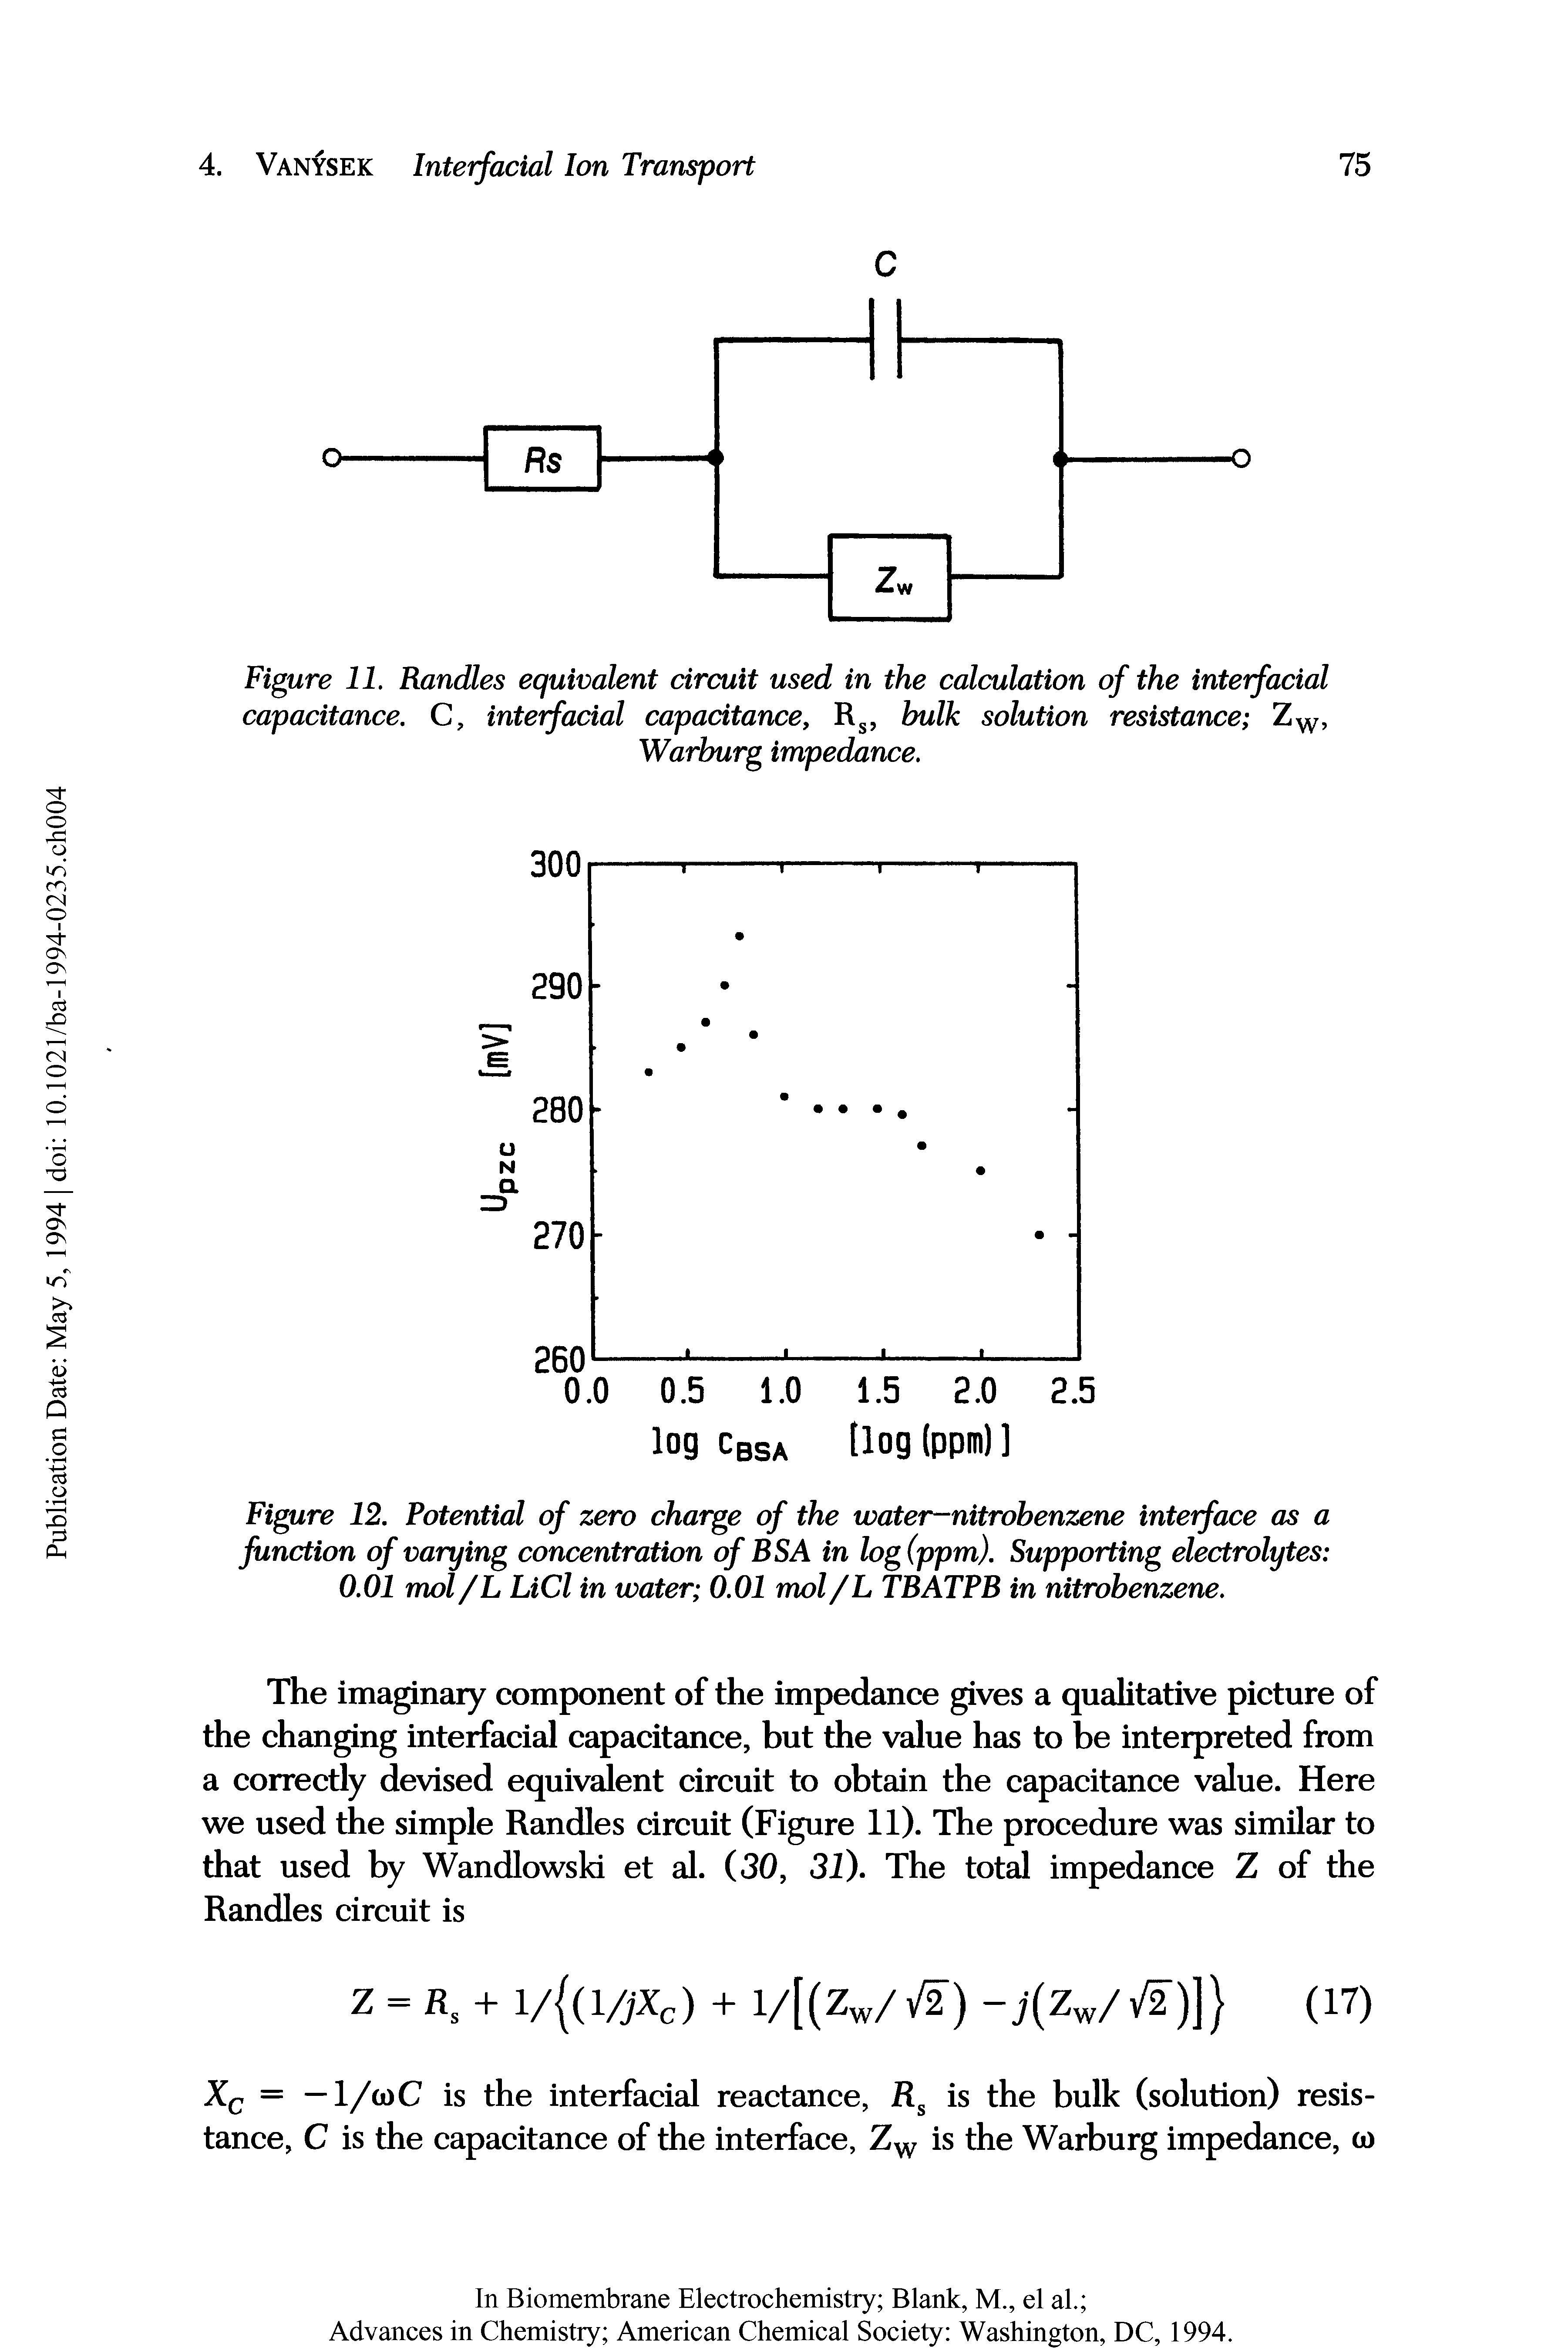 Figure 12. Potential of zero charge of the water-nitrobenzene inteface as a function of varying concentration of BSA in log (ppm). Supporting electrolytes 0.01 mol/L LiCl in water 0.01 mol/L TBATPB in nitrobenzene.